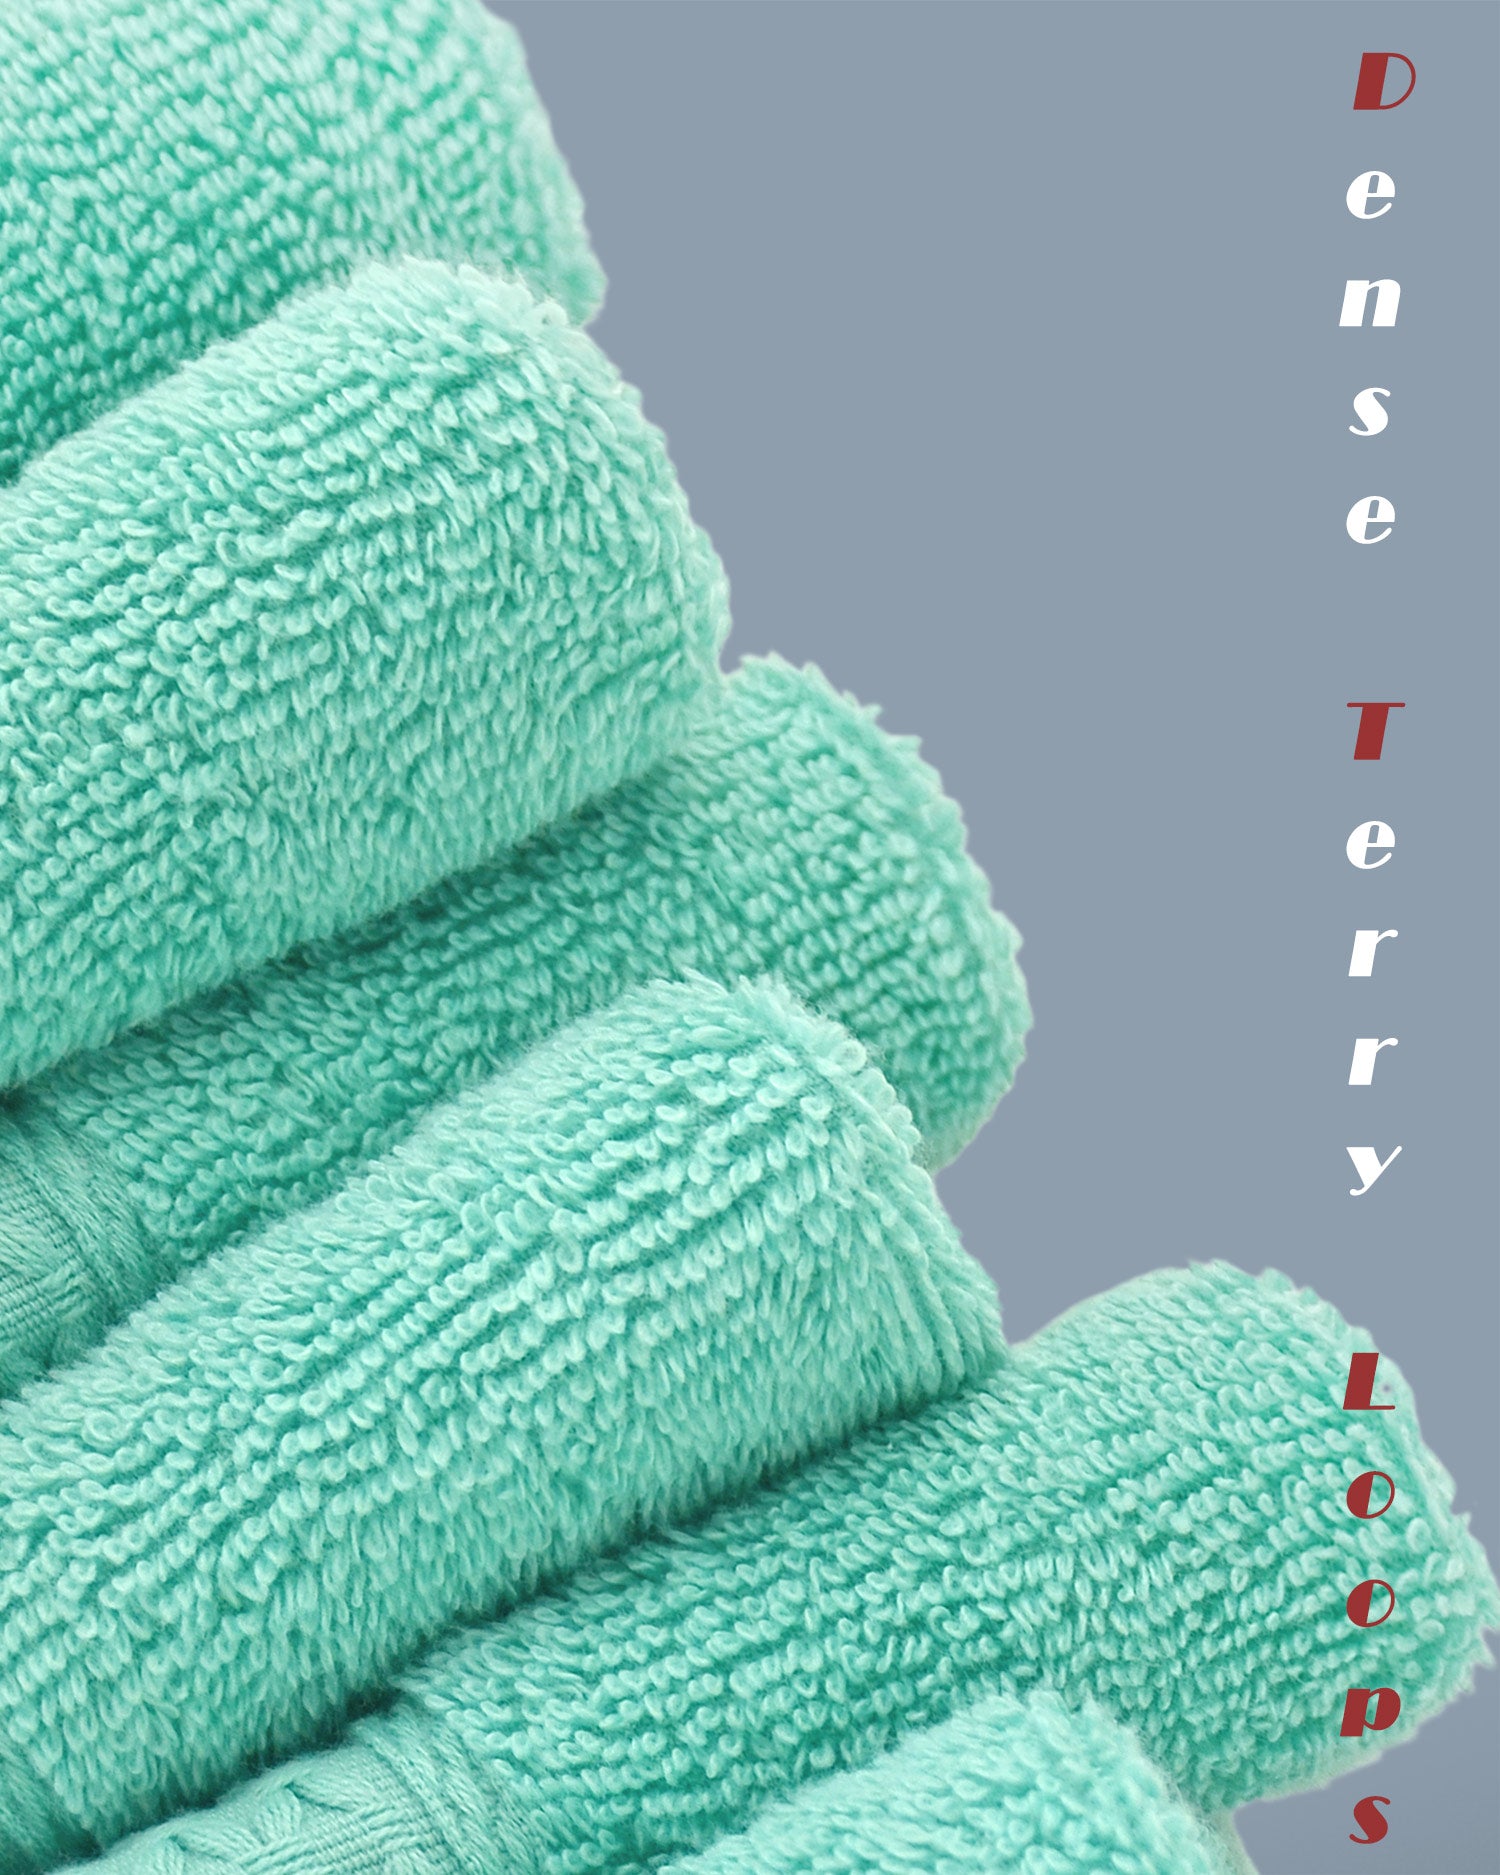 Cleanbear Bath Washcloths Soft Cotton Wash Cloths for Body and Face, Face Towel Set of 6 Large Bathroom Wash Cloth (Teal, 13 x 13 Inches)